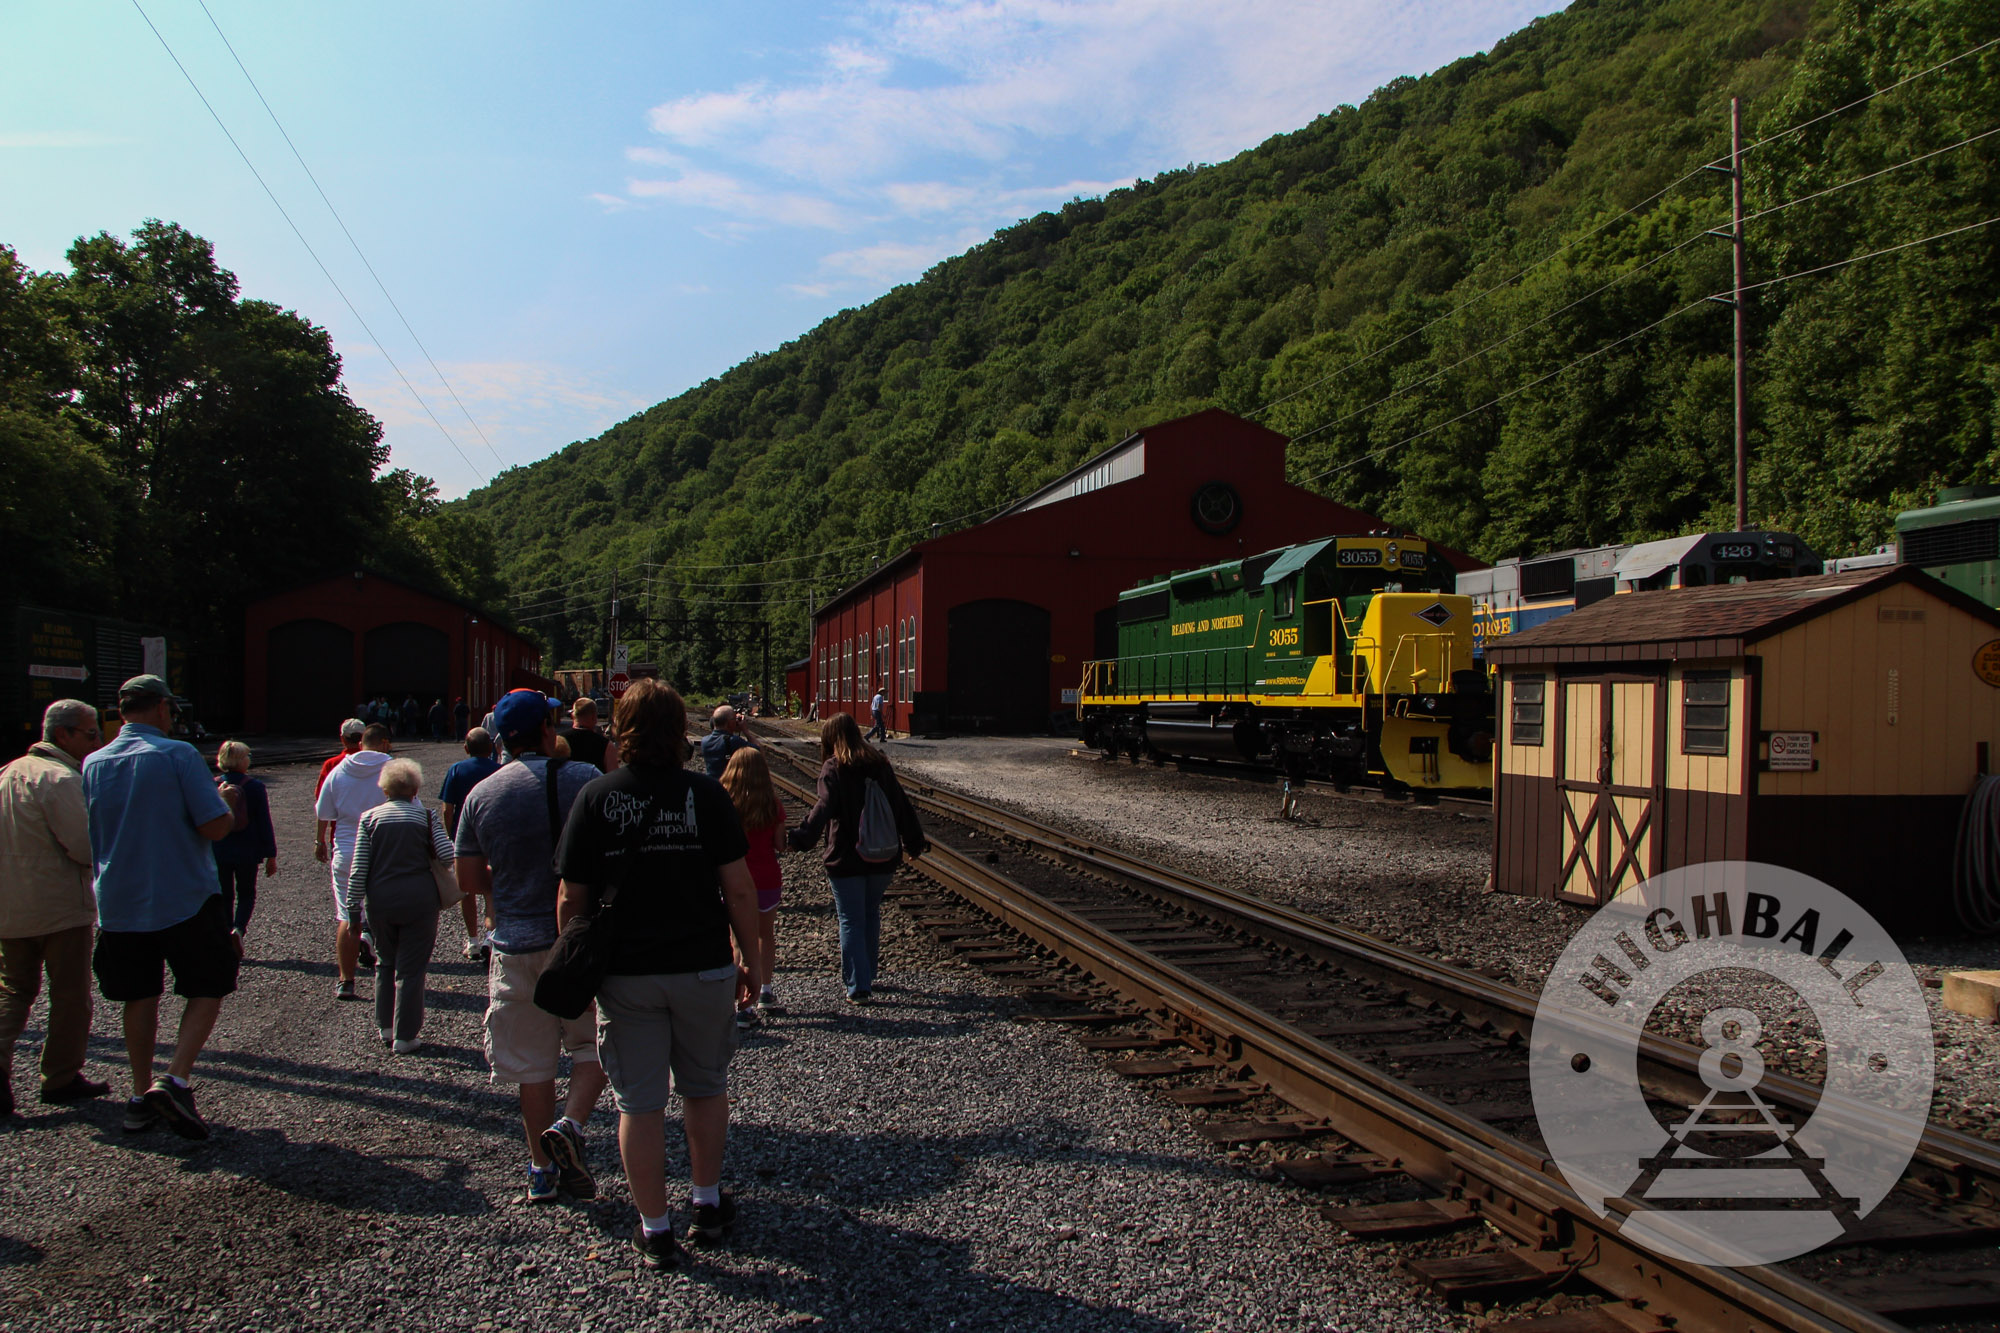 Exterior view of the workshops of the Reading Blue Mountain & Northern Railroad, Port Clinton, Pennsylvania, USA, 2016.